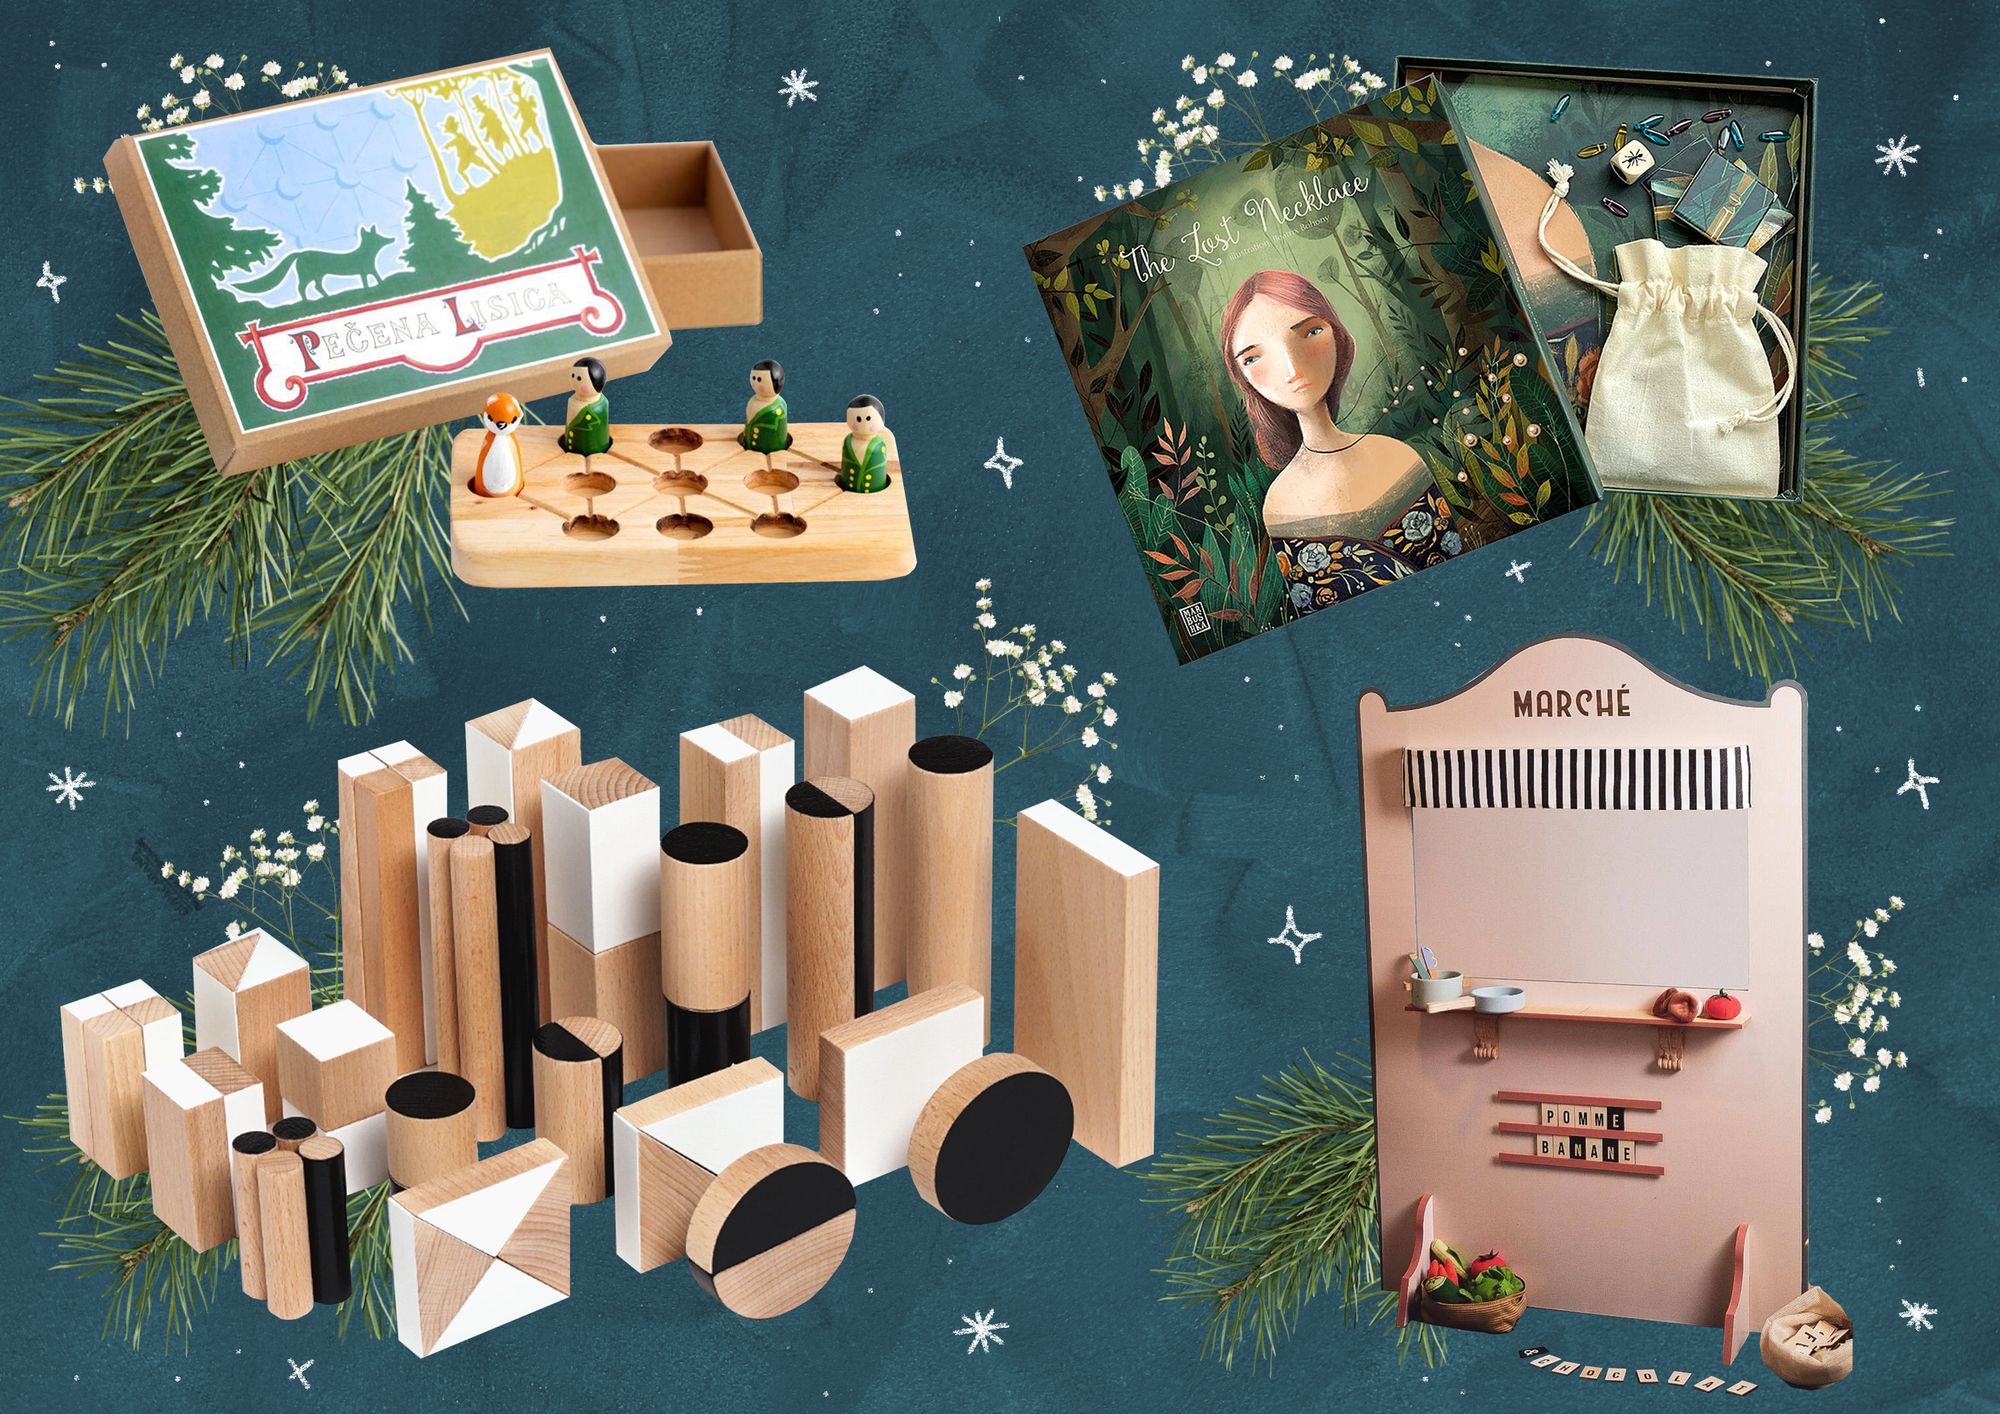 Cool designs for the little hands | Regional Gift Guide—kids edition